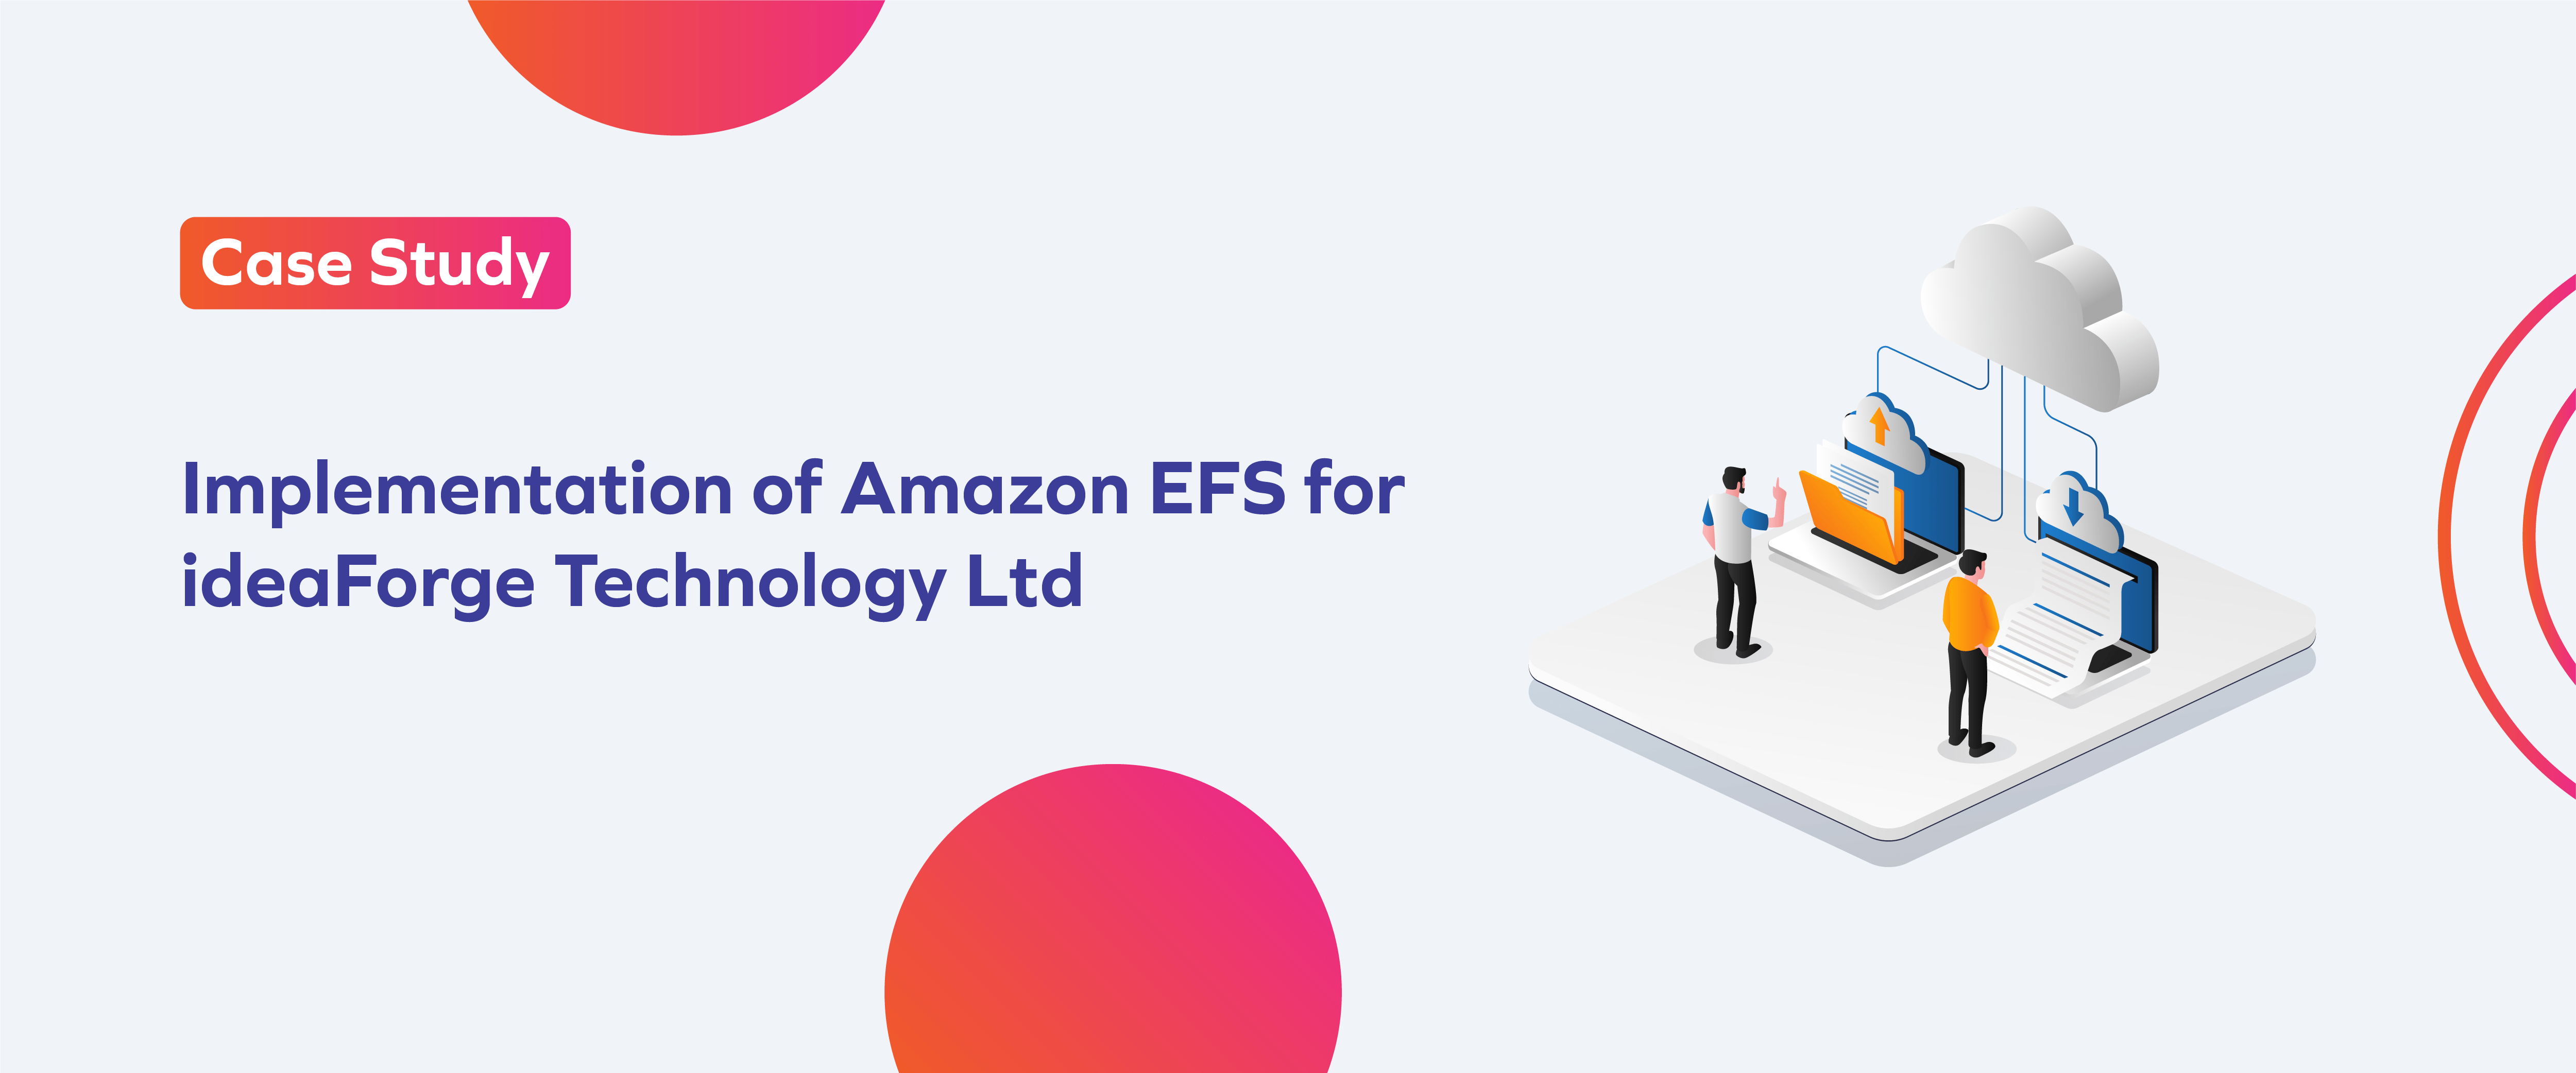 Implementation of Amazon EFS for ideaForge Technology Ltd